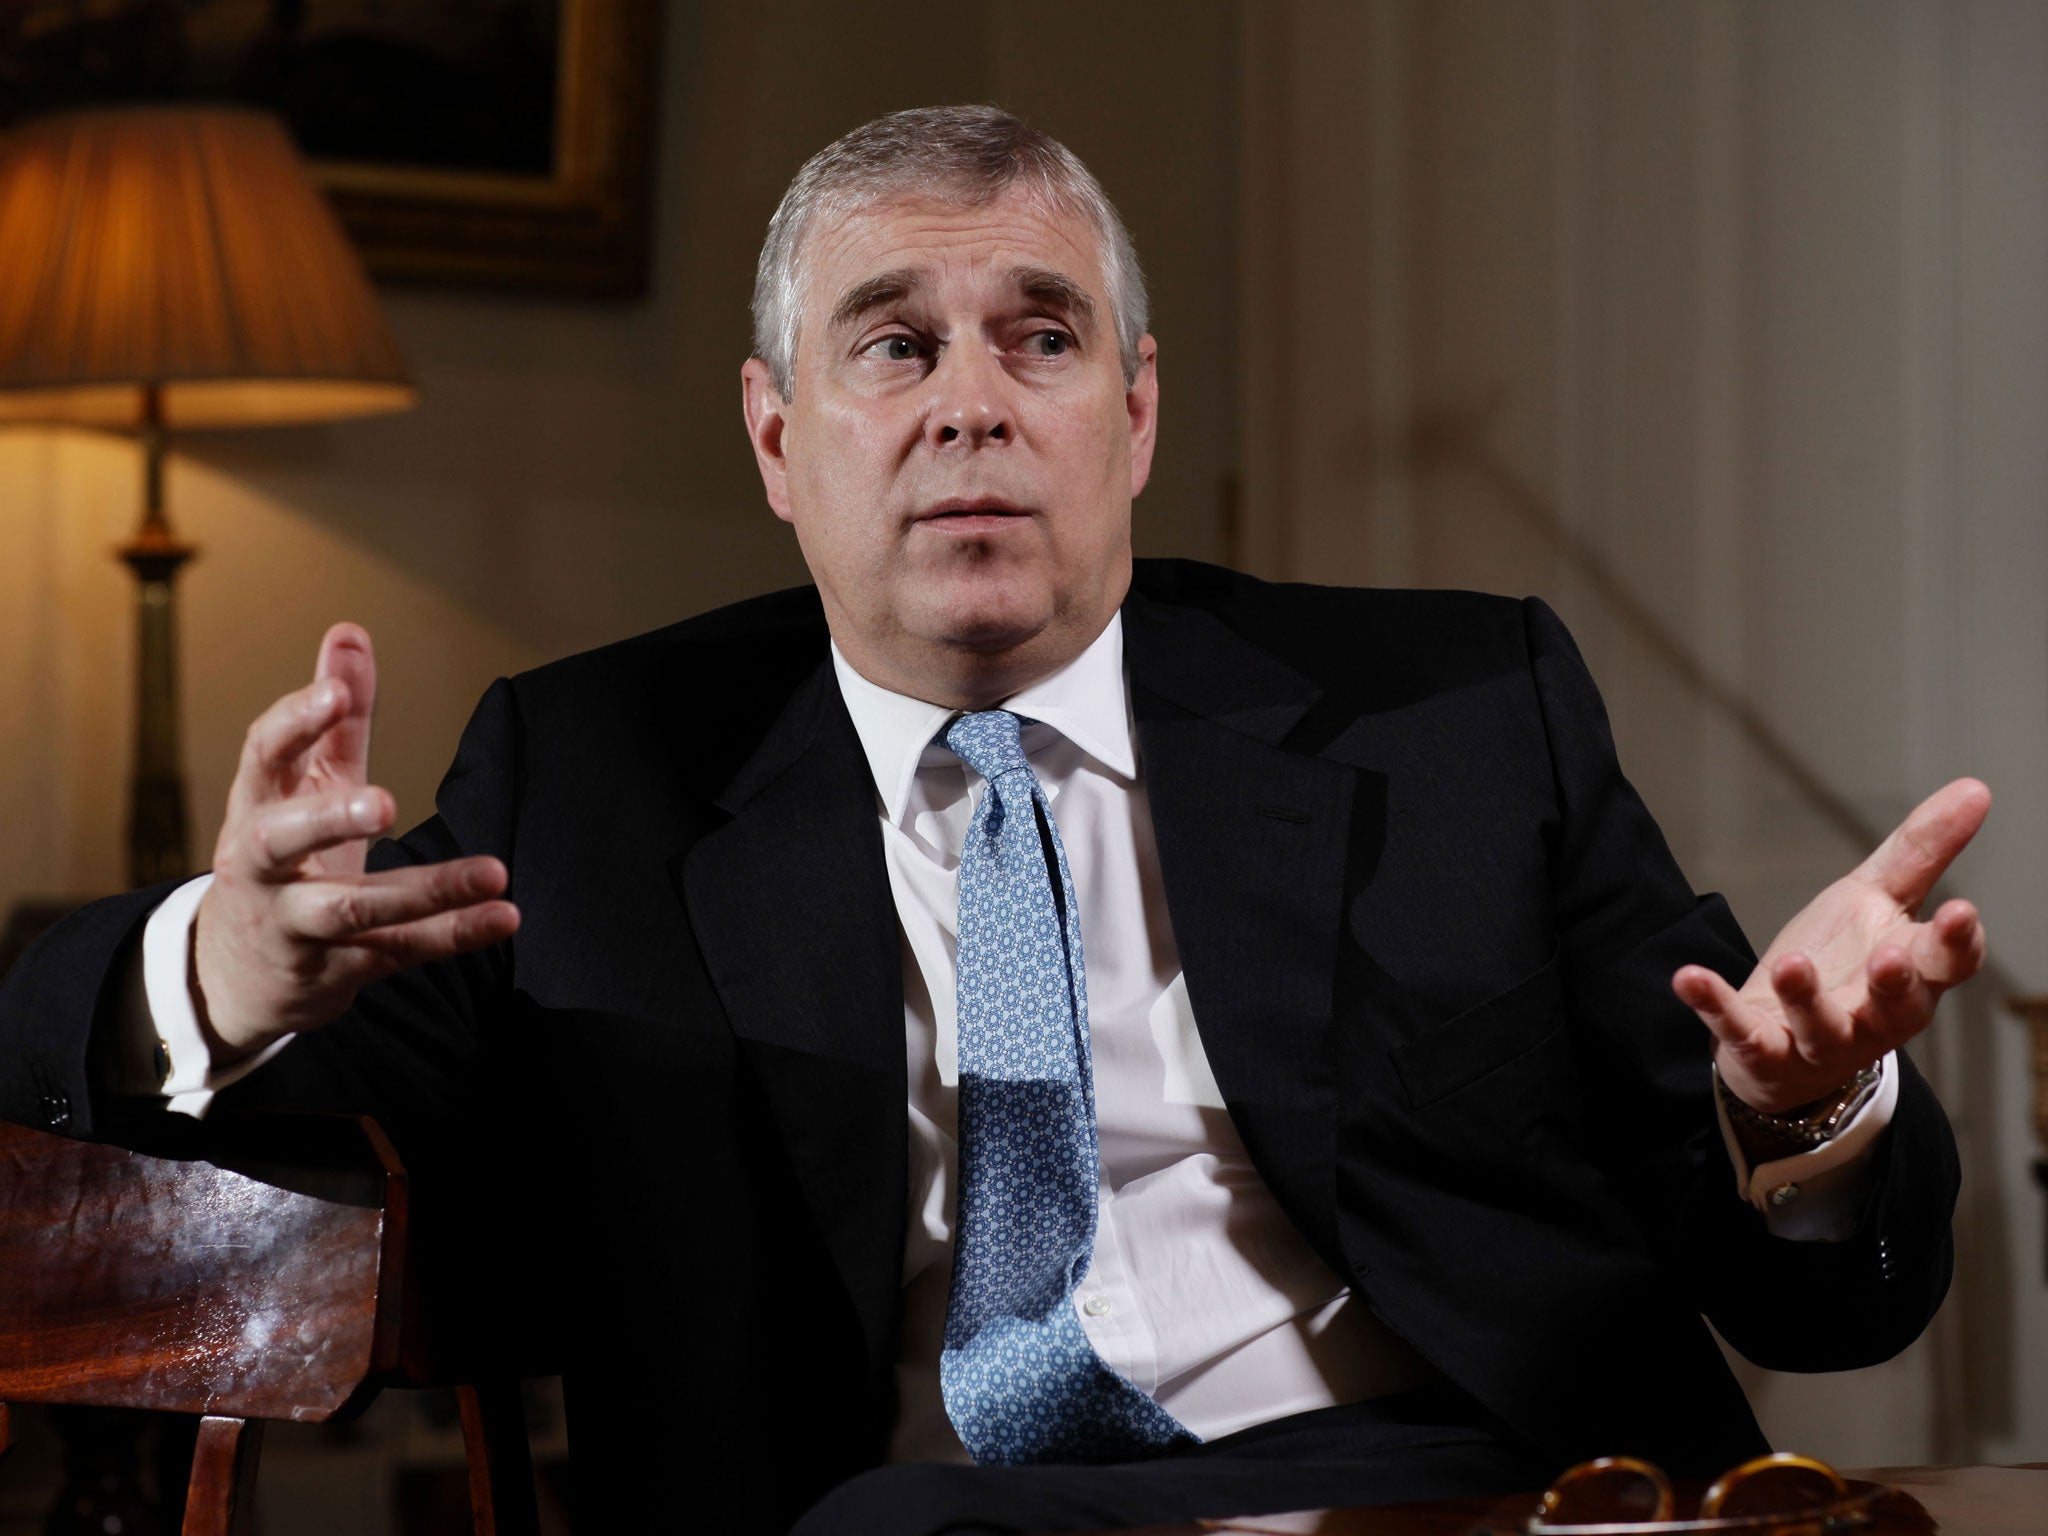 Prince Andrew feels priority in education ‘has been moving elsewhere’